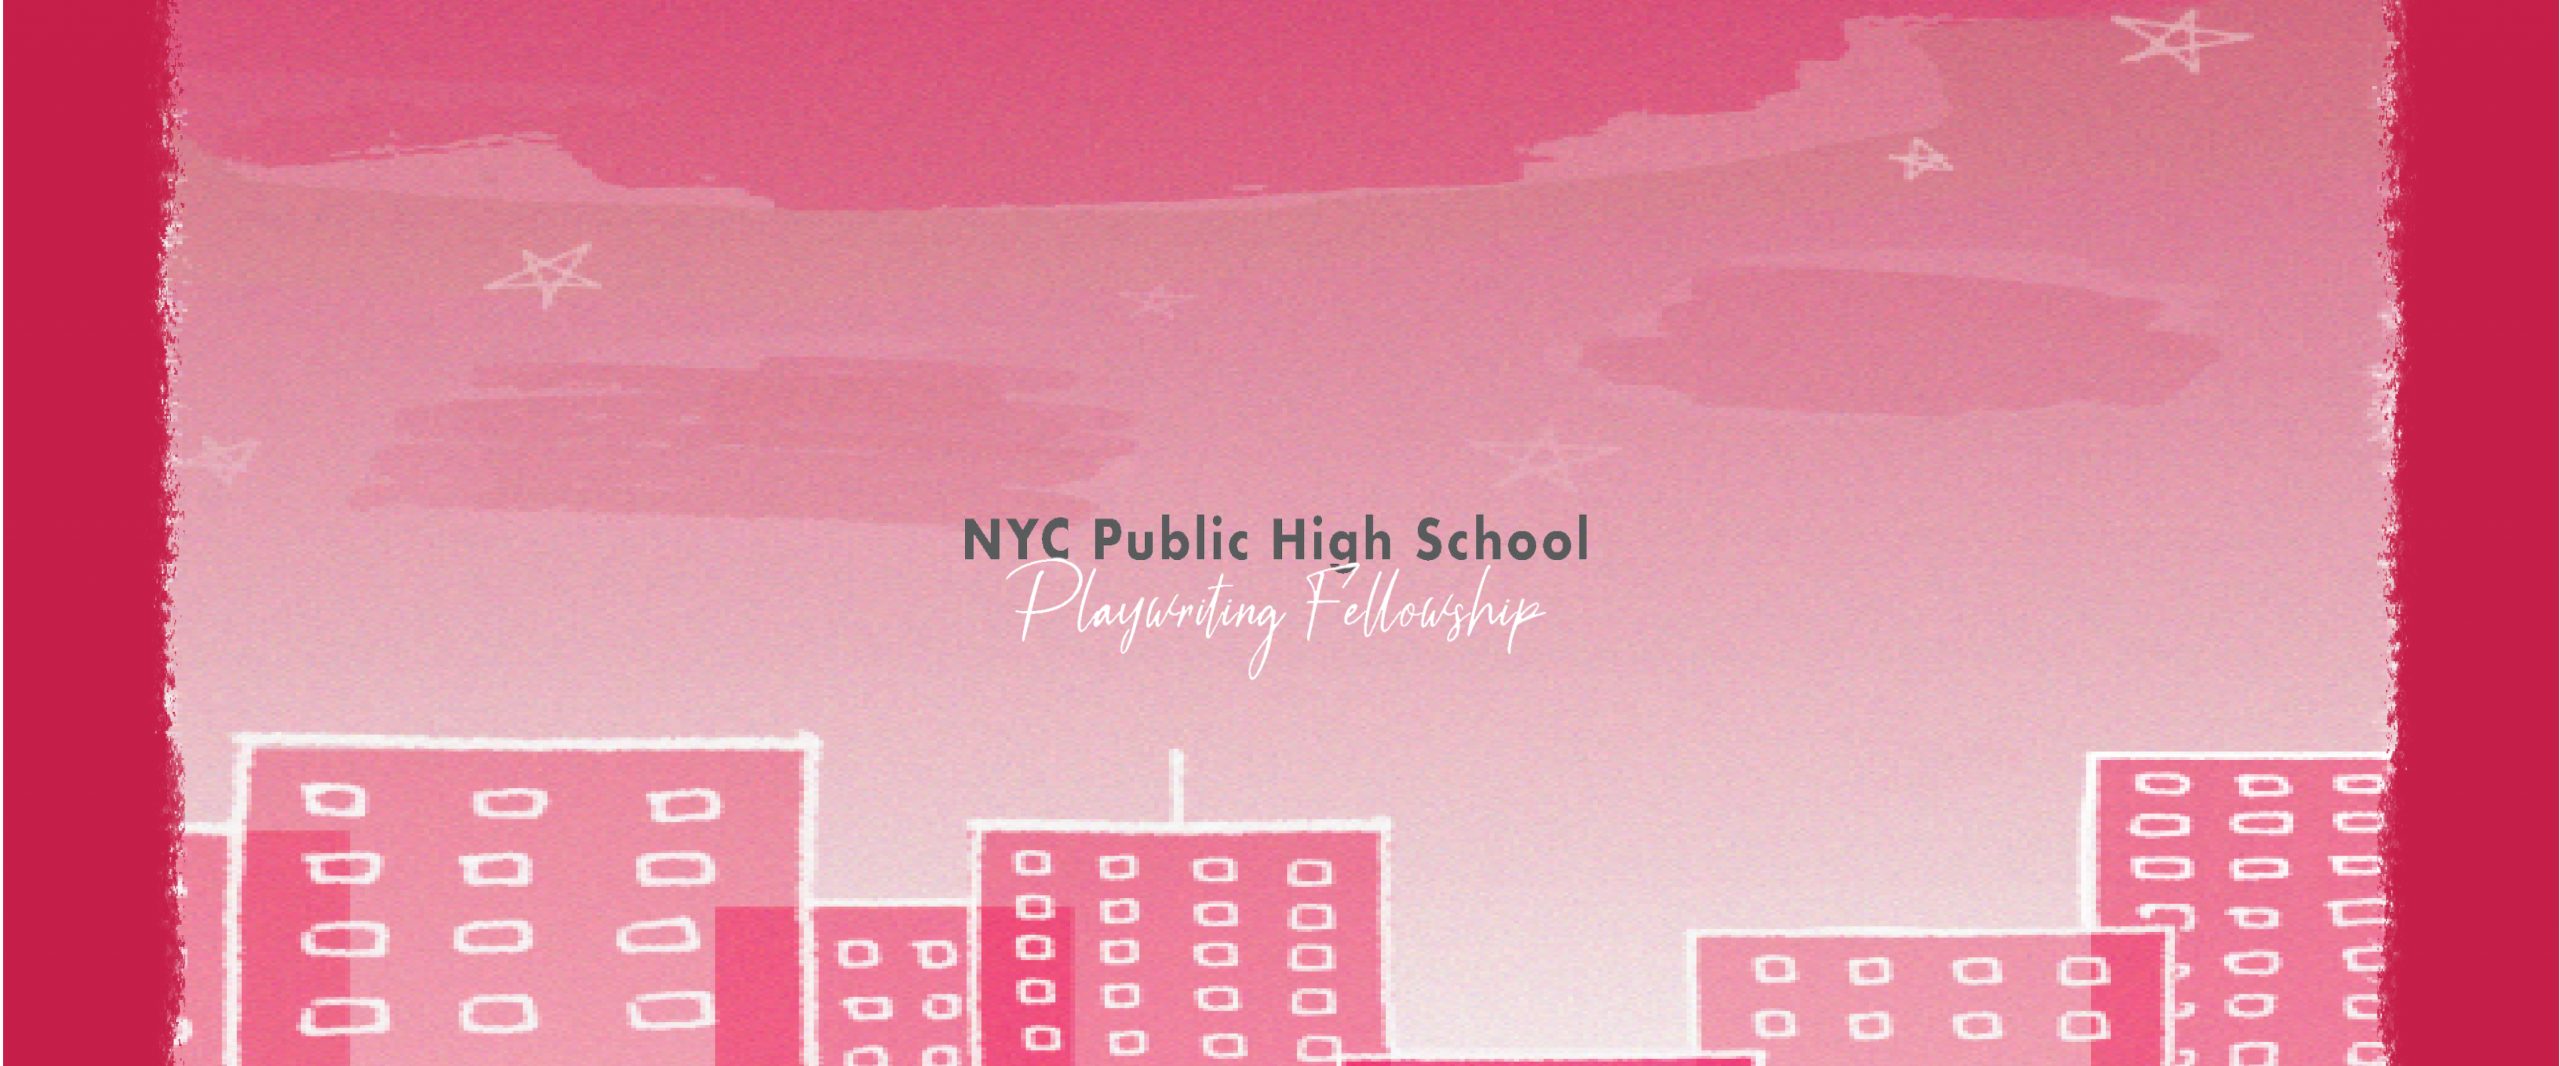 A pink-colored illustration of a city skyline. Above the buildings, the text reads: NYC Public High School Playwriting Fellowship